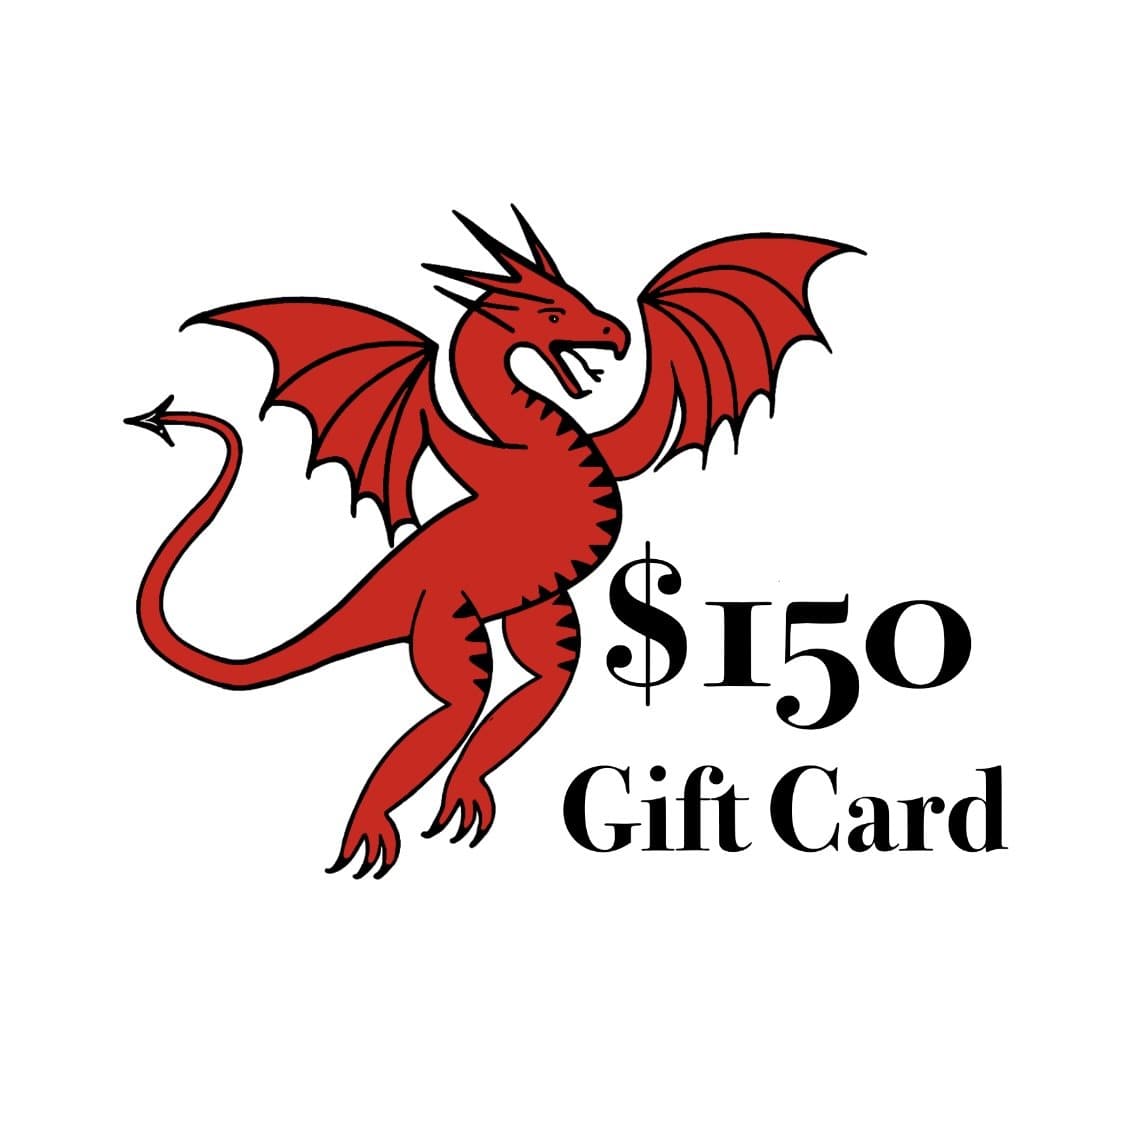 Reptile Realm Gift Cards $150.00 Reptile Realm Gift Card